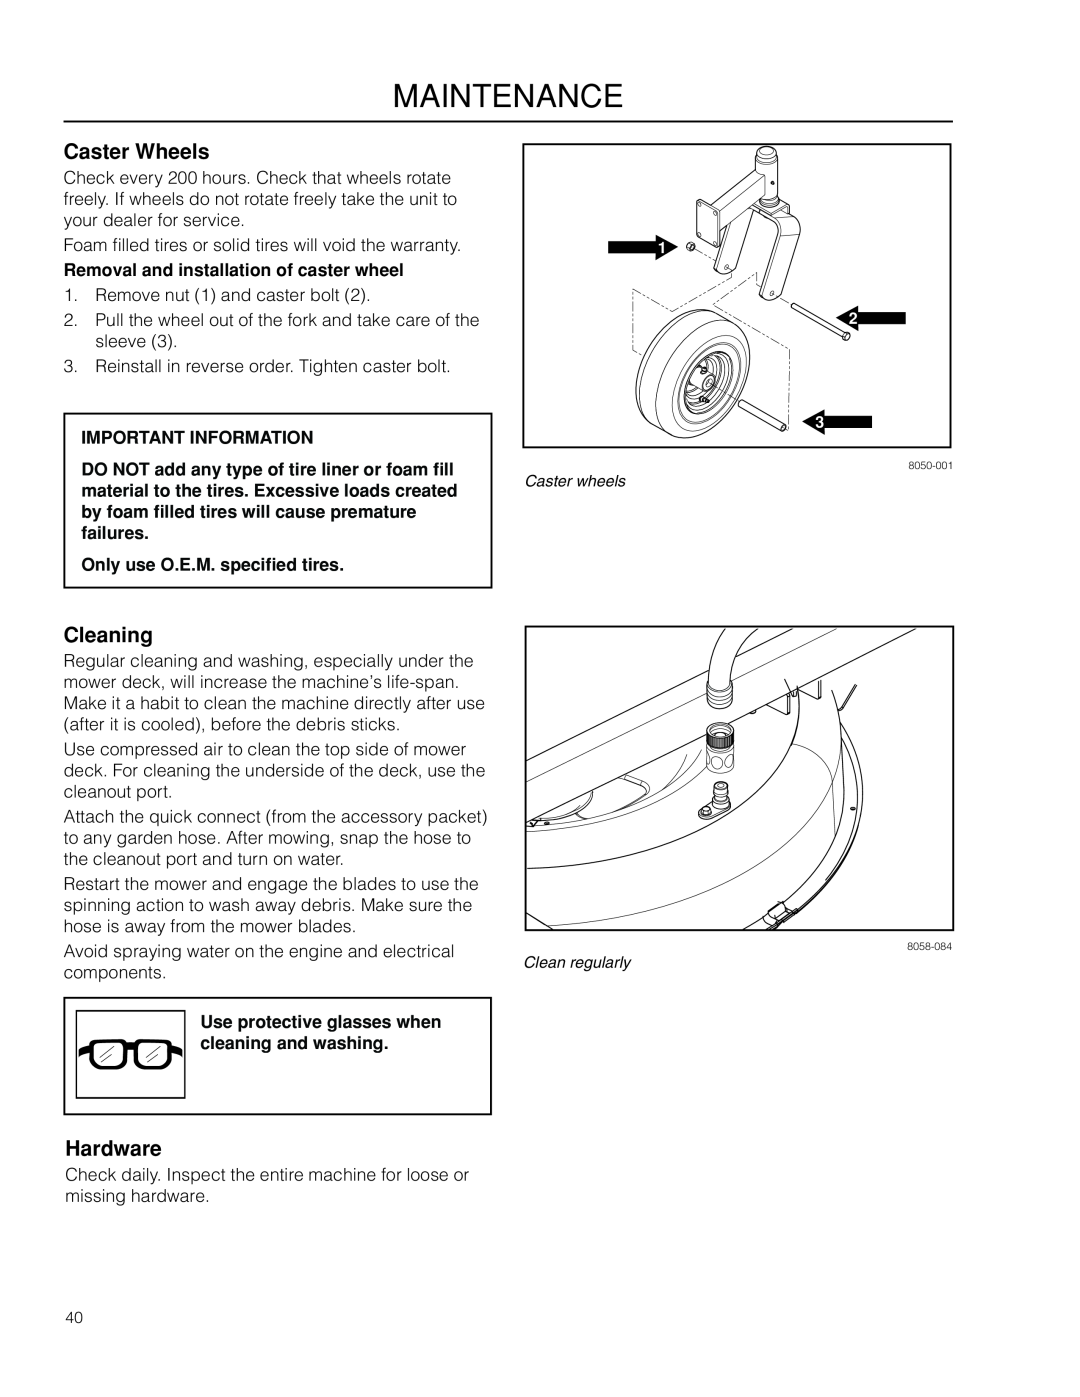 McCulloch ZM3816 BF, 966582001 Caster Wheels, Cleaning, Hardware, Removal and installation of caster wheel, Maintenance 